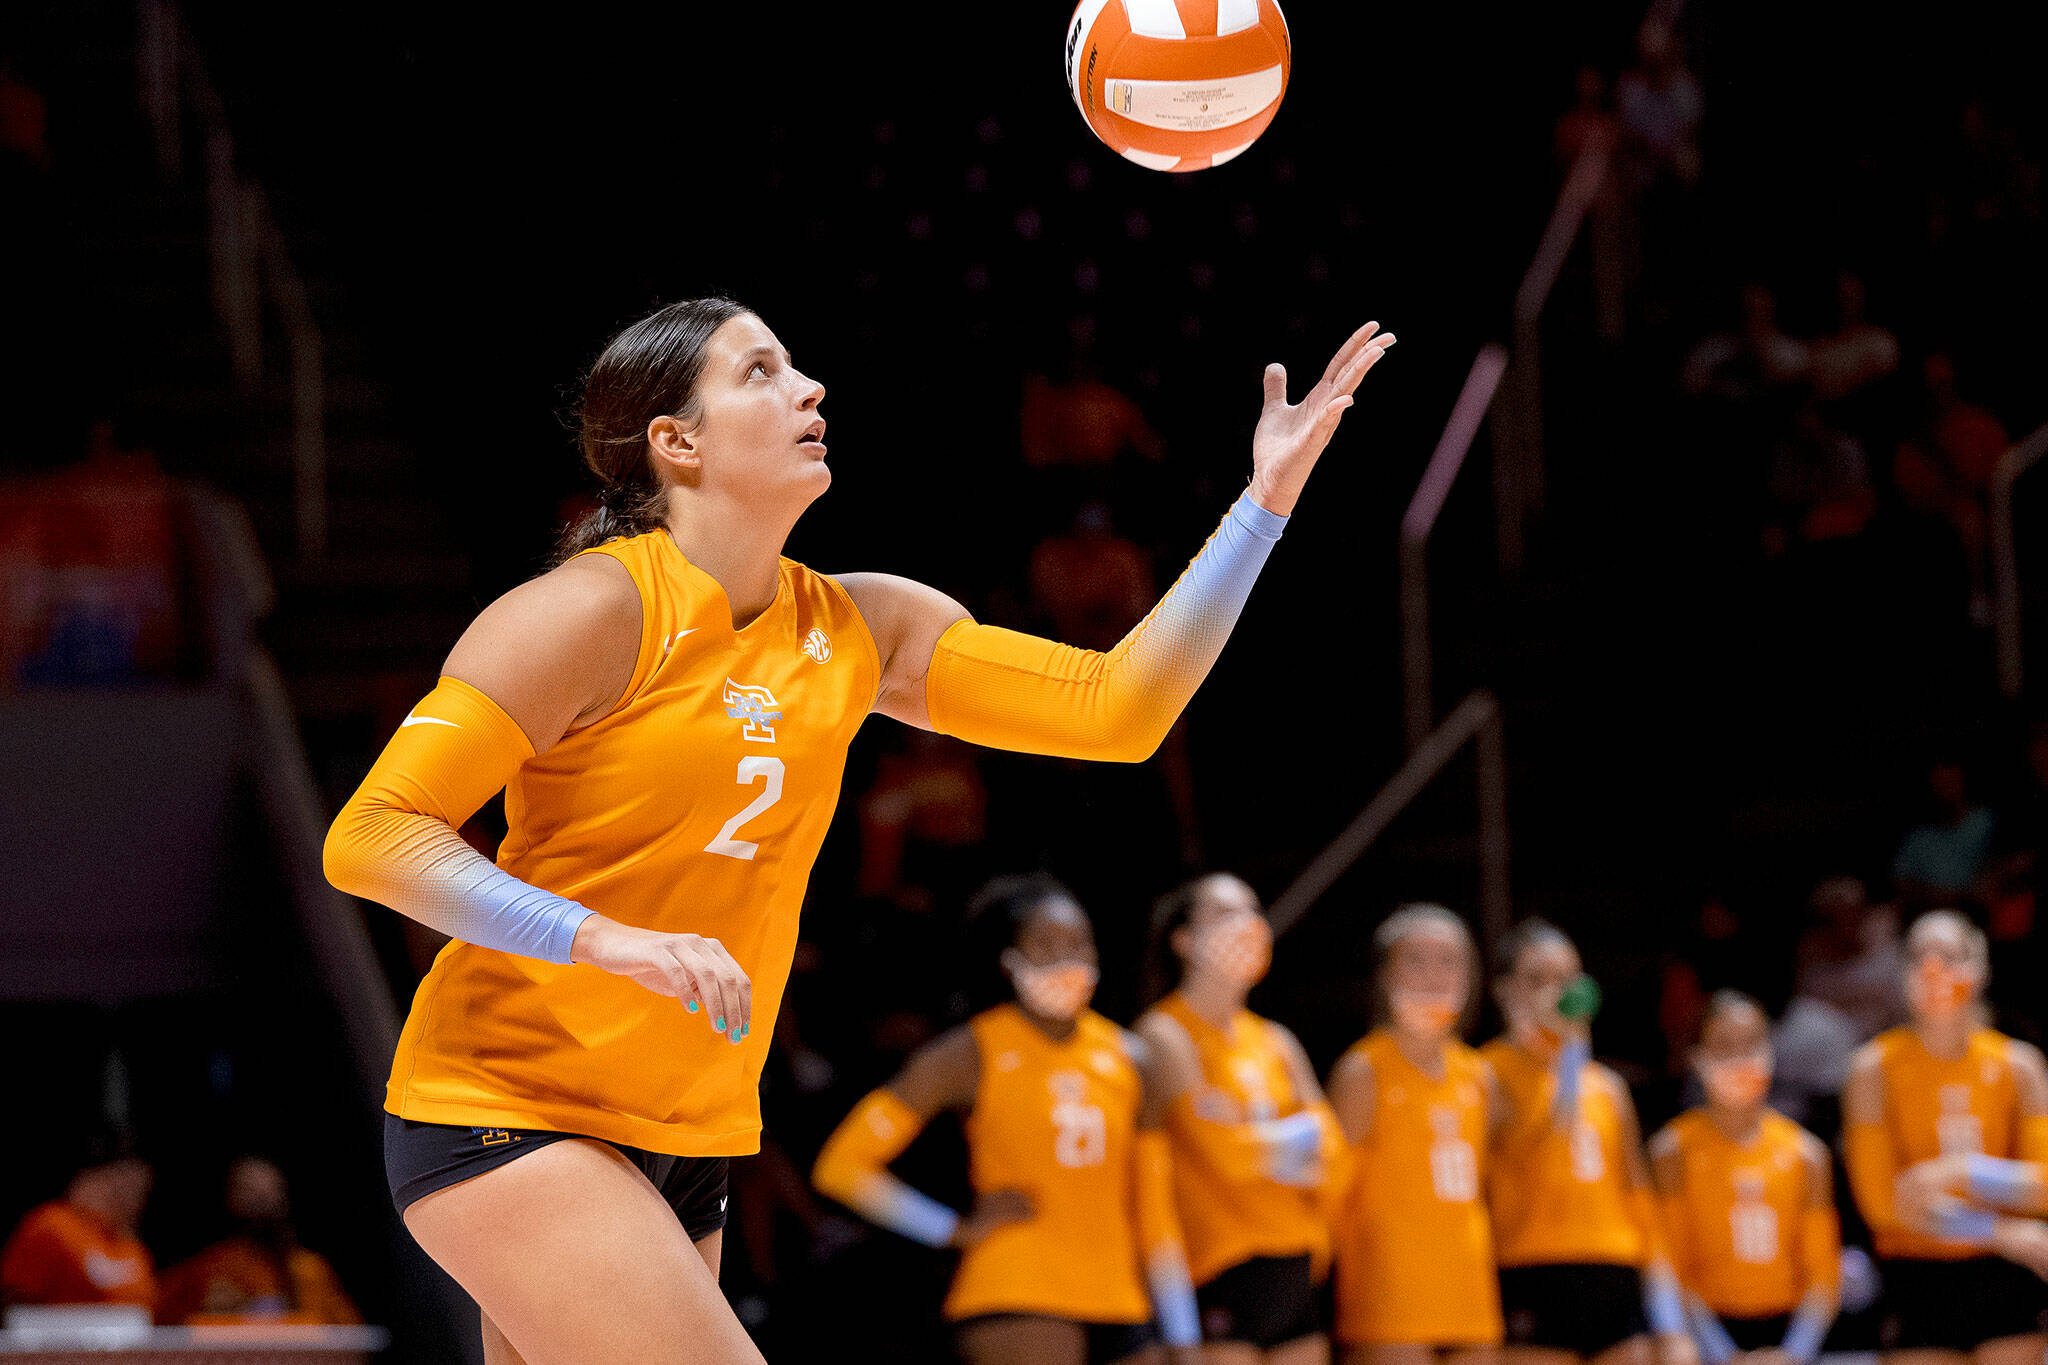 Tennessee’s Natalie Hayward, an Archbishop Murphy graduate, serves during a game against Texas Tech on Aug. 27 in Knoxville, Tennessee. (University of Tennessee athletics)